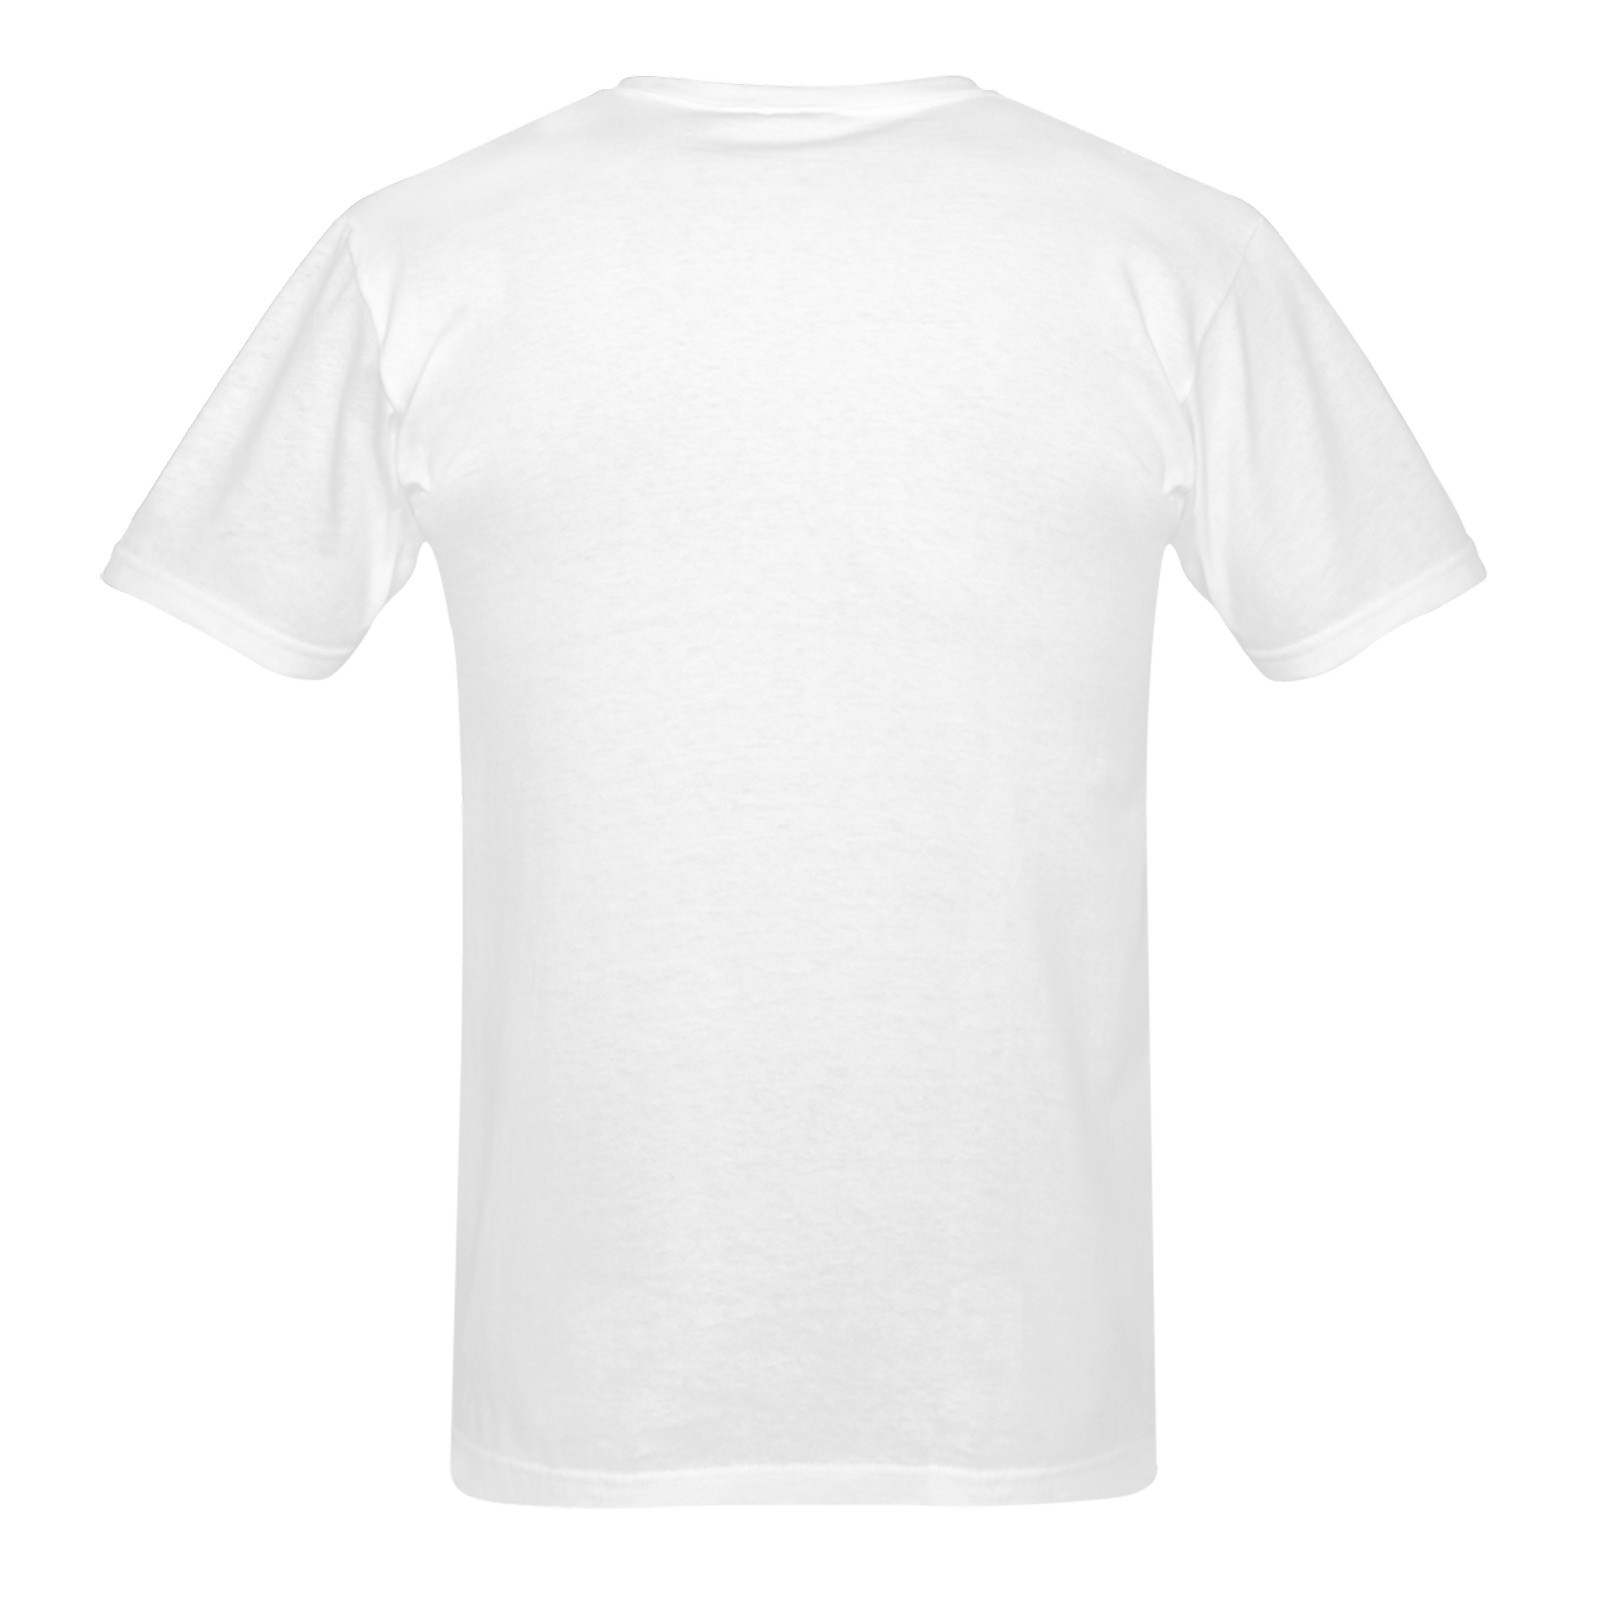 White - Men's Heavy Cotton T-Shirt (One Side Printing)